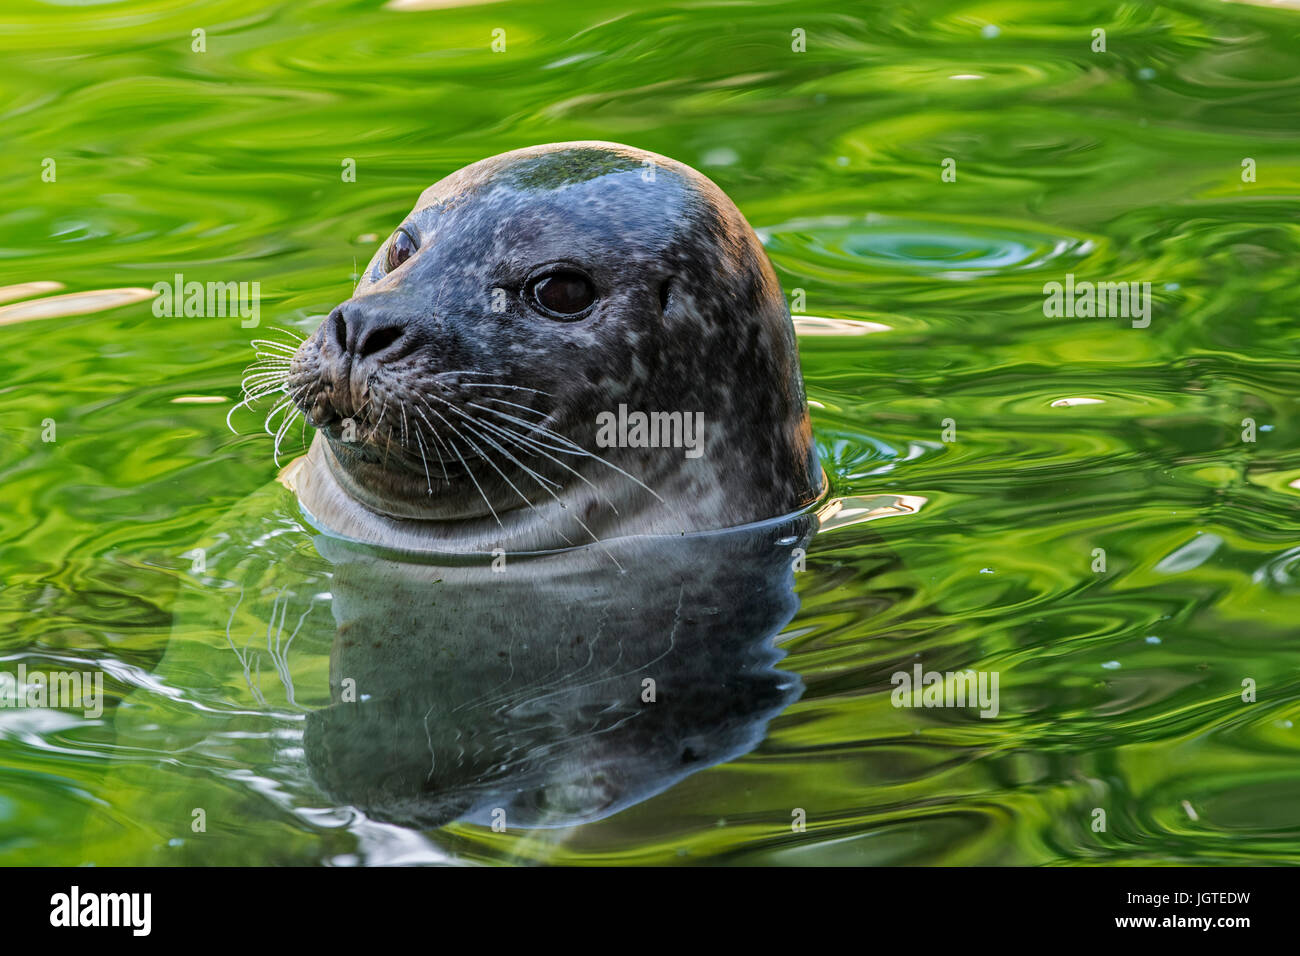 Common seal / harbor seal / harbour seal (Phoca vitulina) floating in water, close up portrait Stock Photo